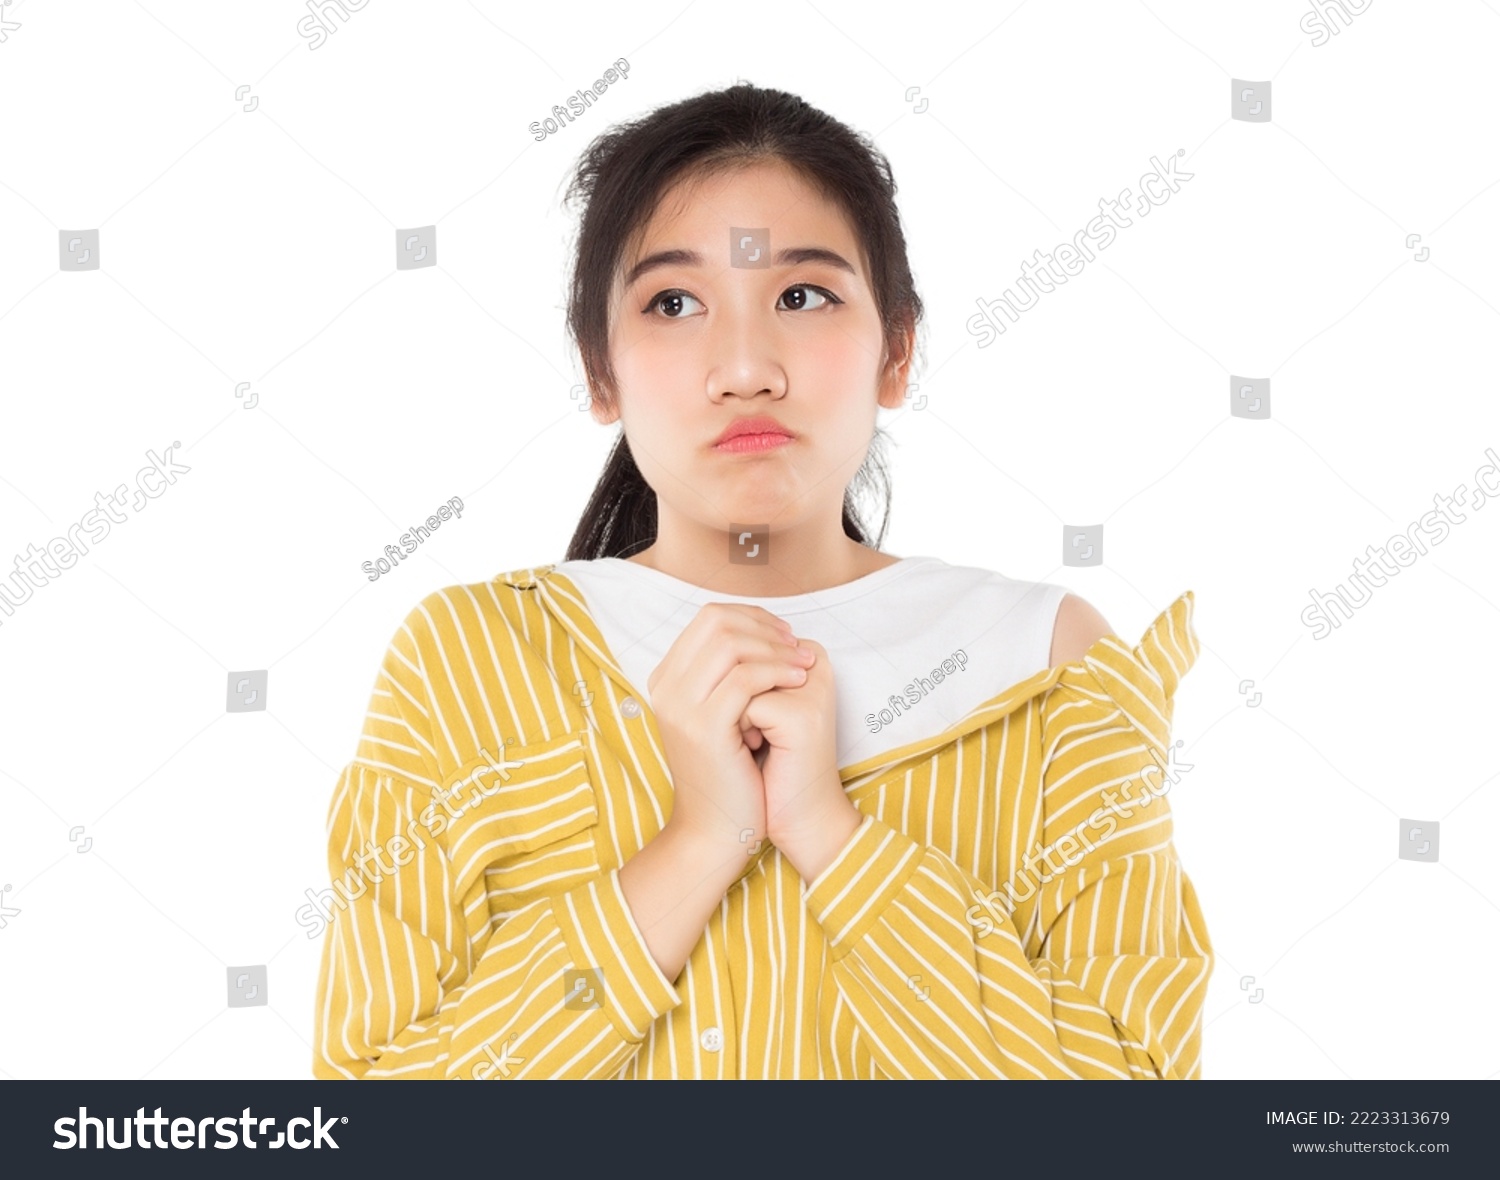 asian teenage girls showing expresion expectation, thinking, disappointed on white background #2223313679